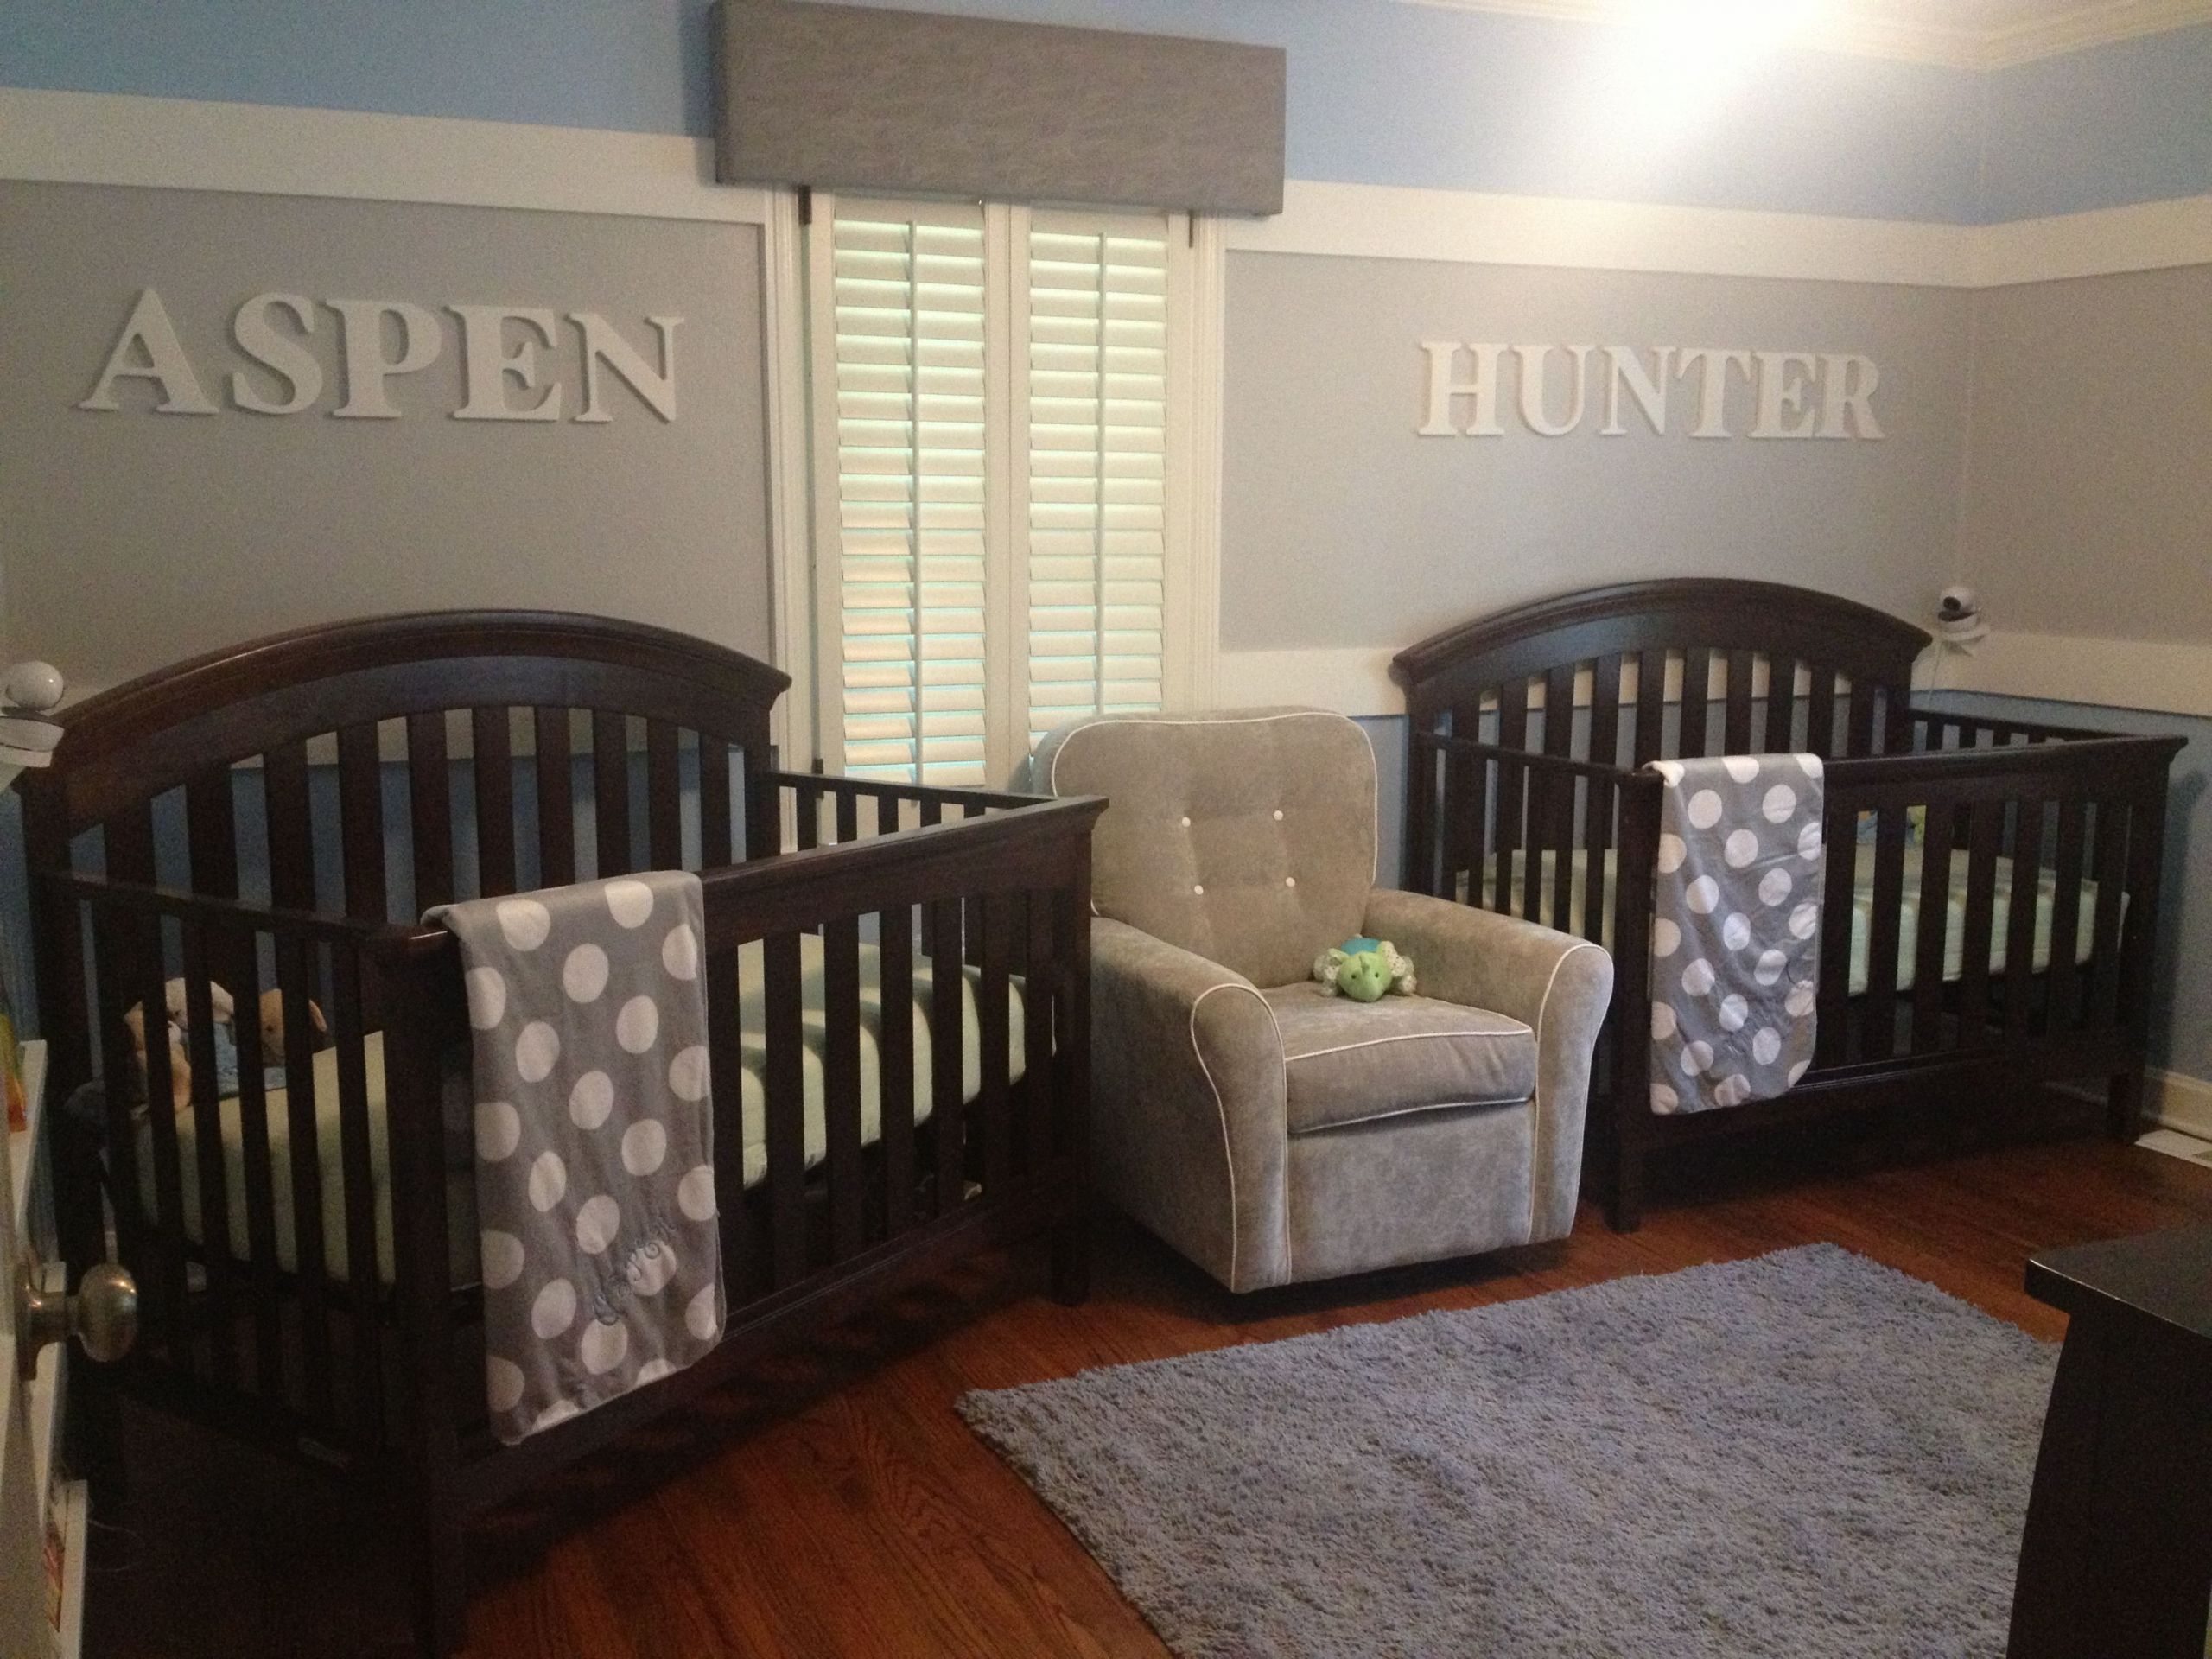 Twins Baby Room Decorating Ideas
 Vintage Baby Boy Room Ideas Baby boy nursery ideas